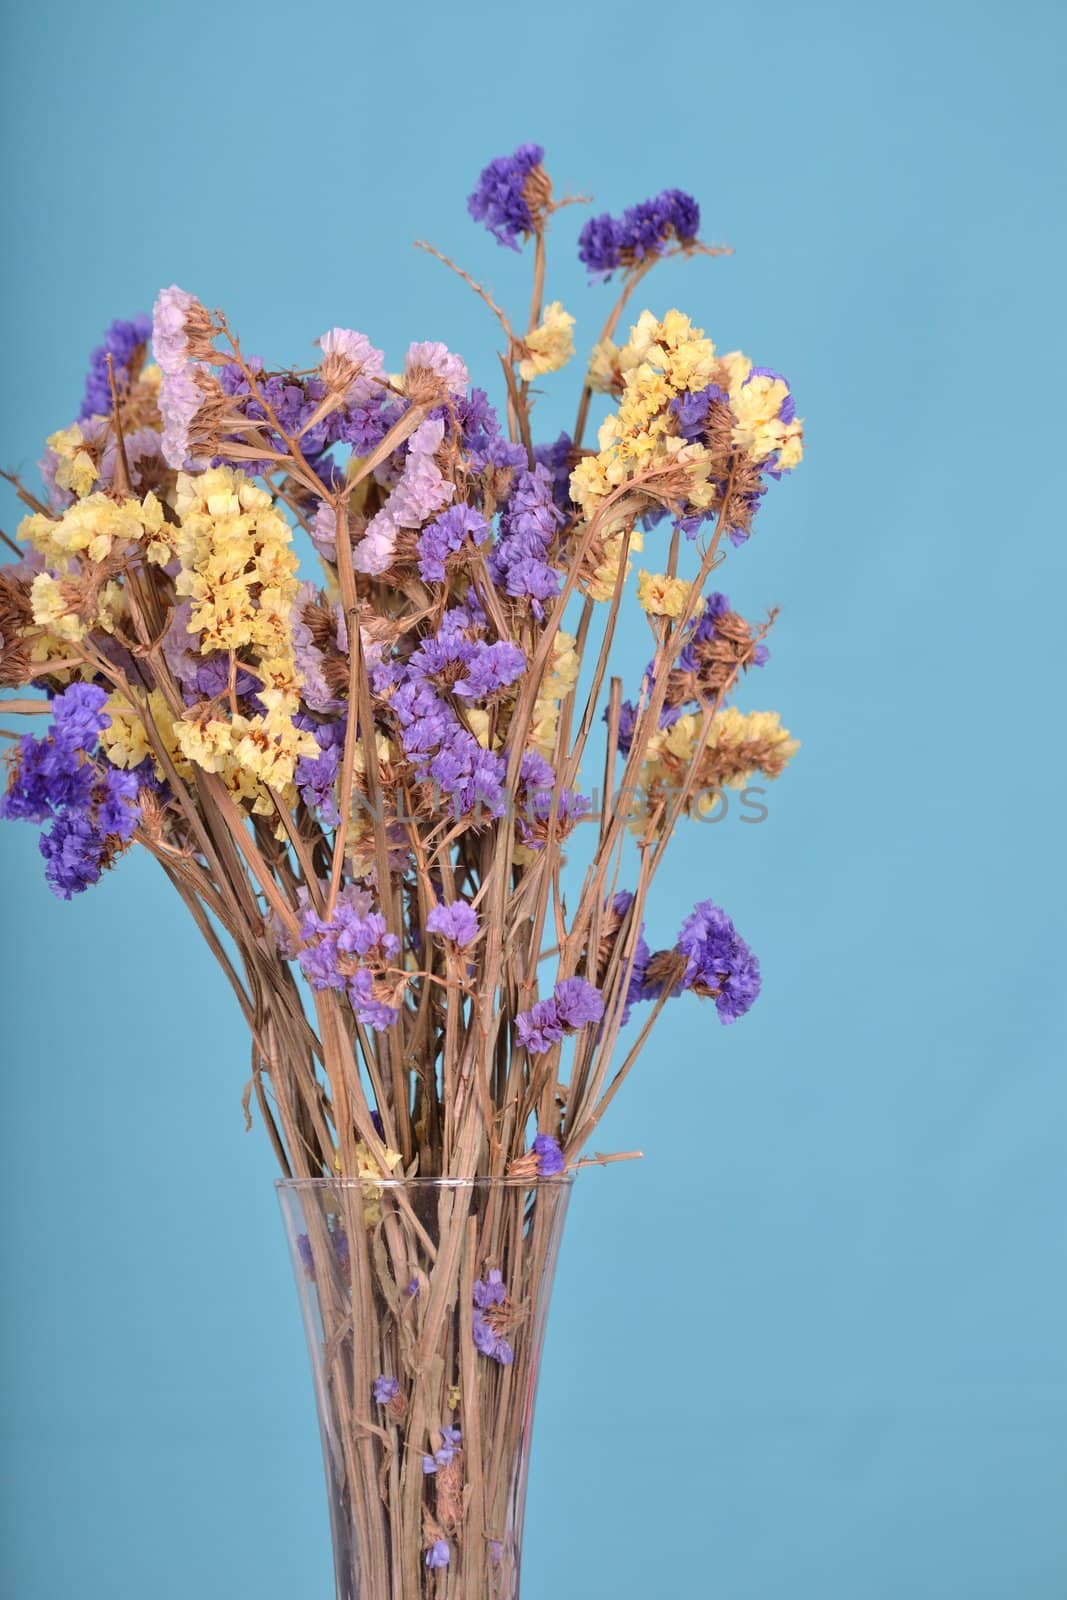 Composition of dried flowers arranged in a vase